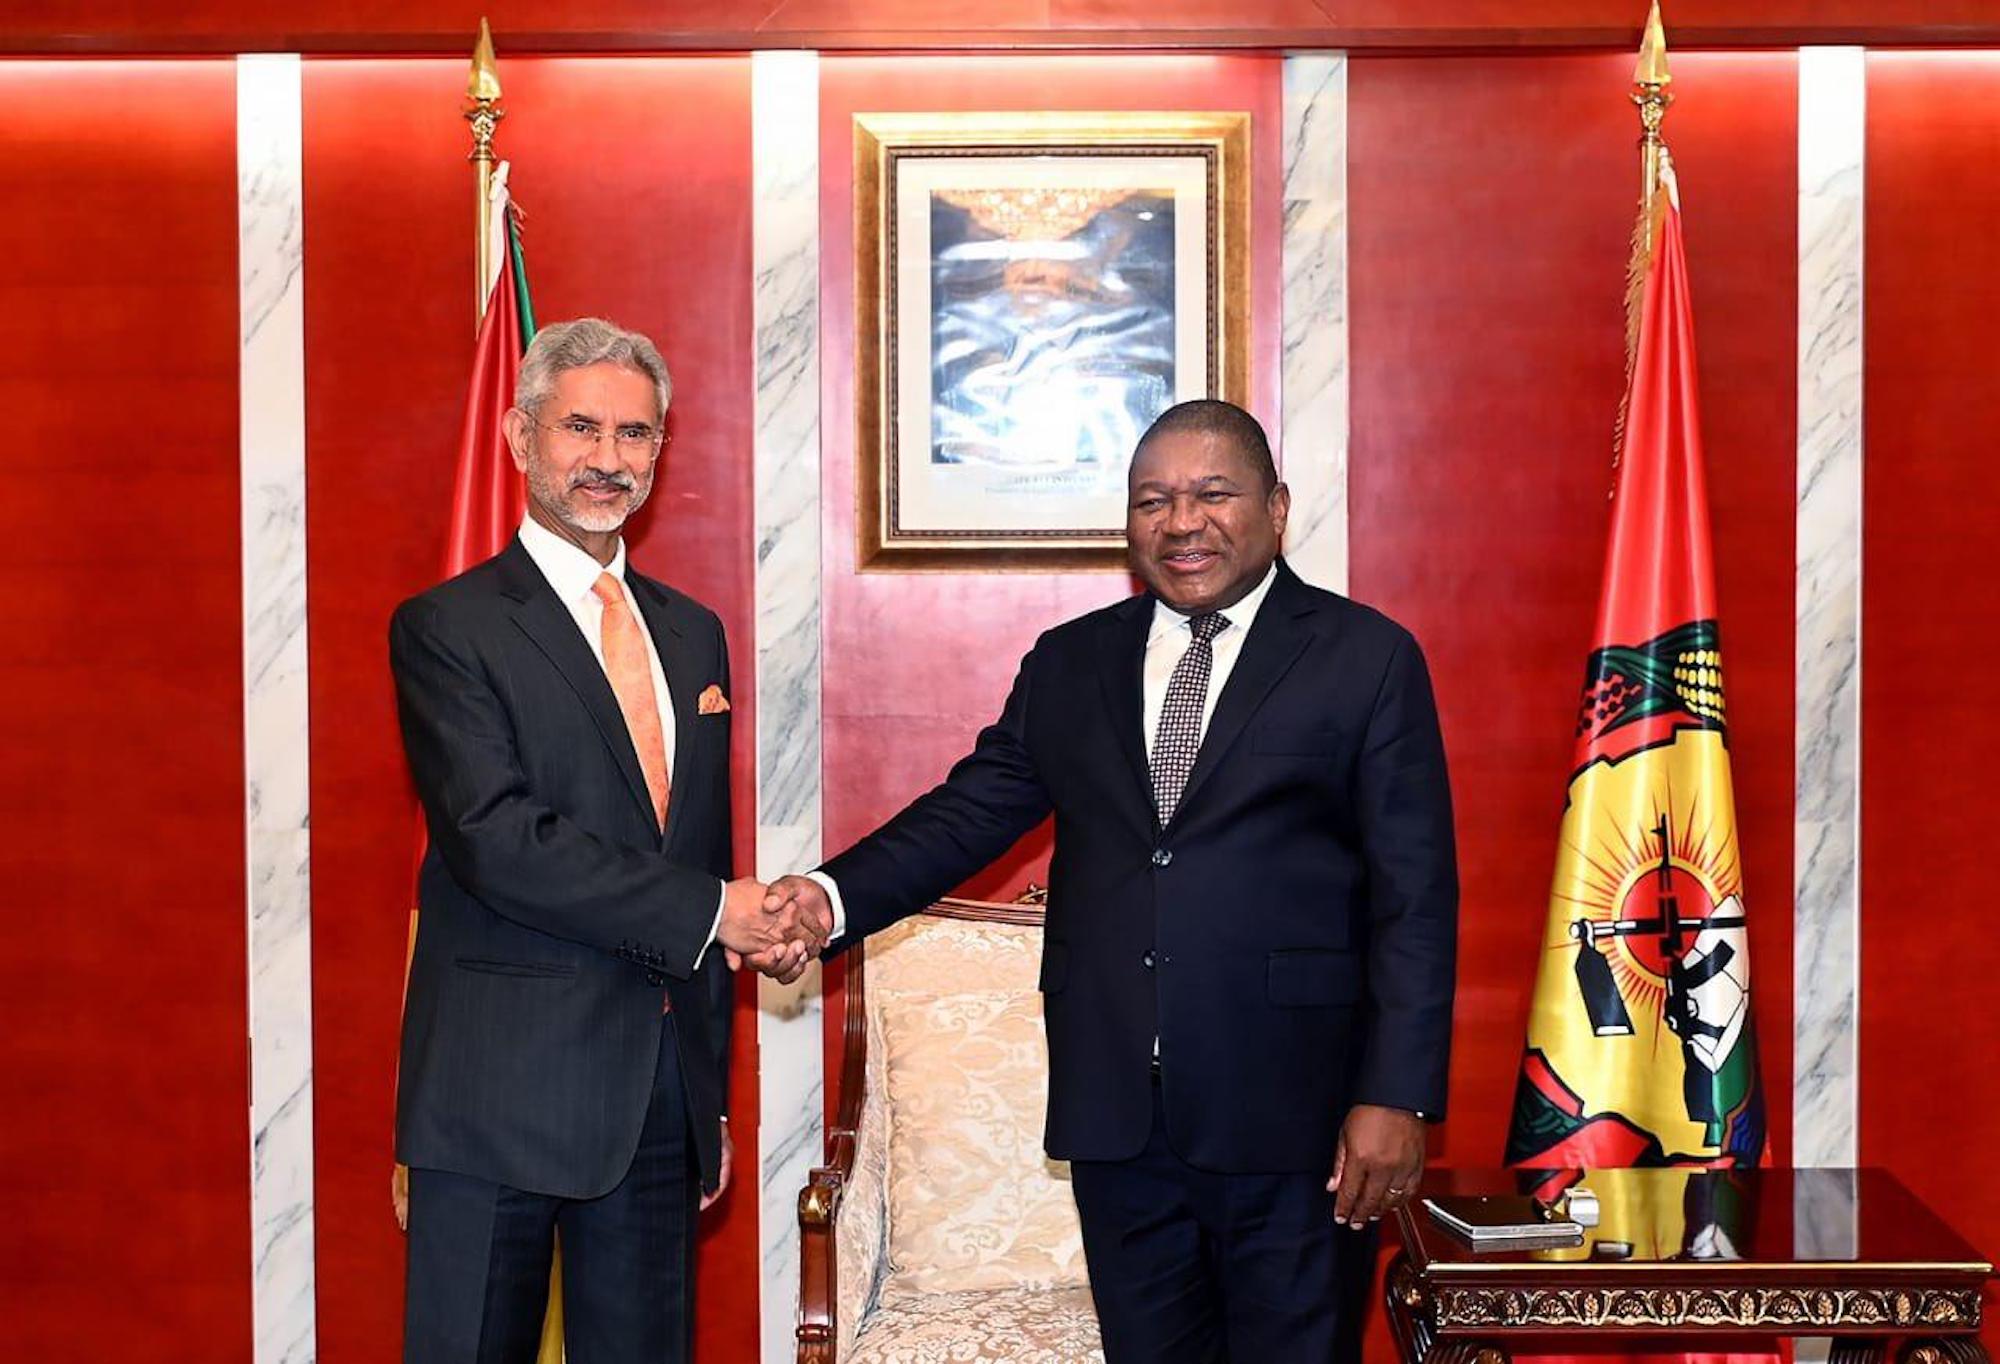 Mozambique is striking a railway deal with India